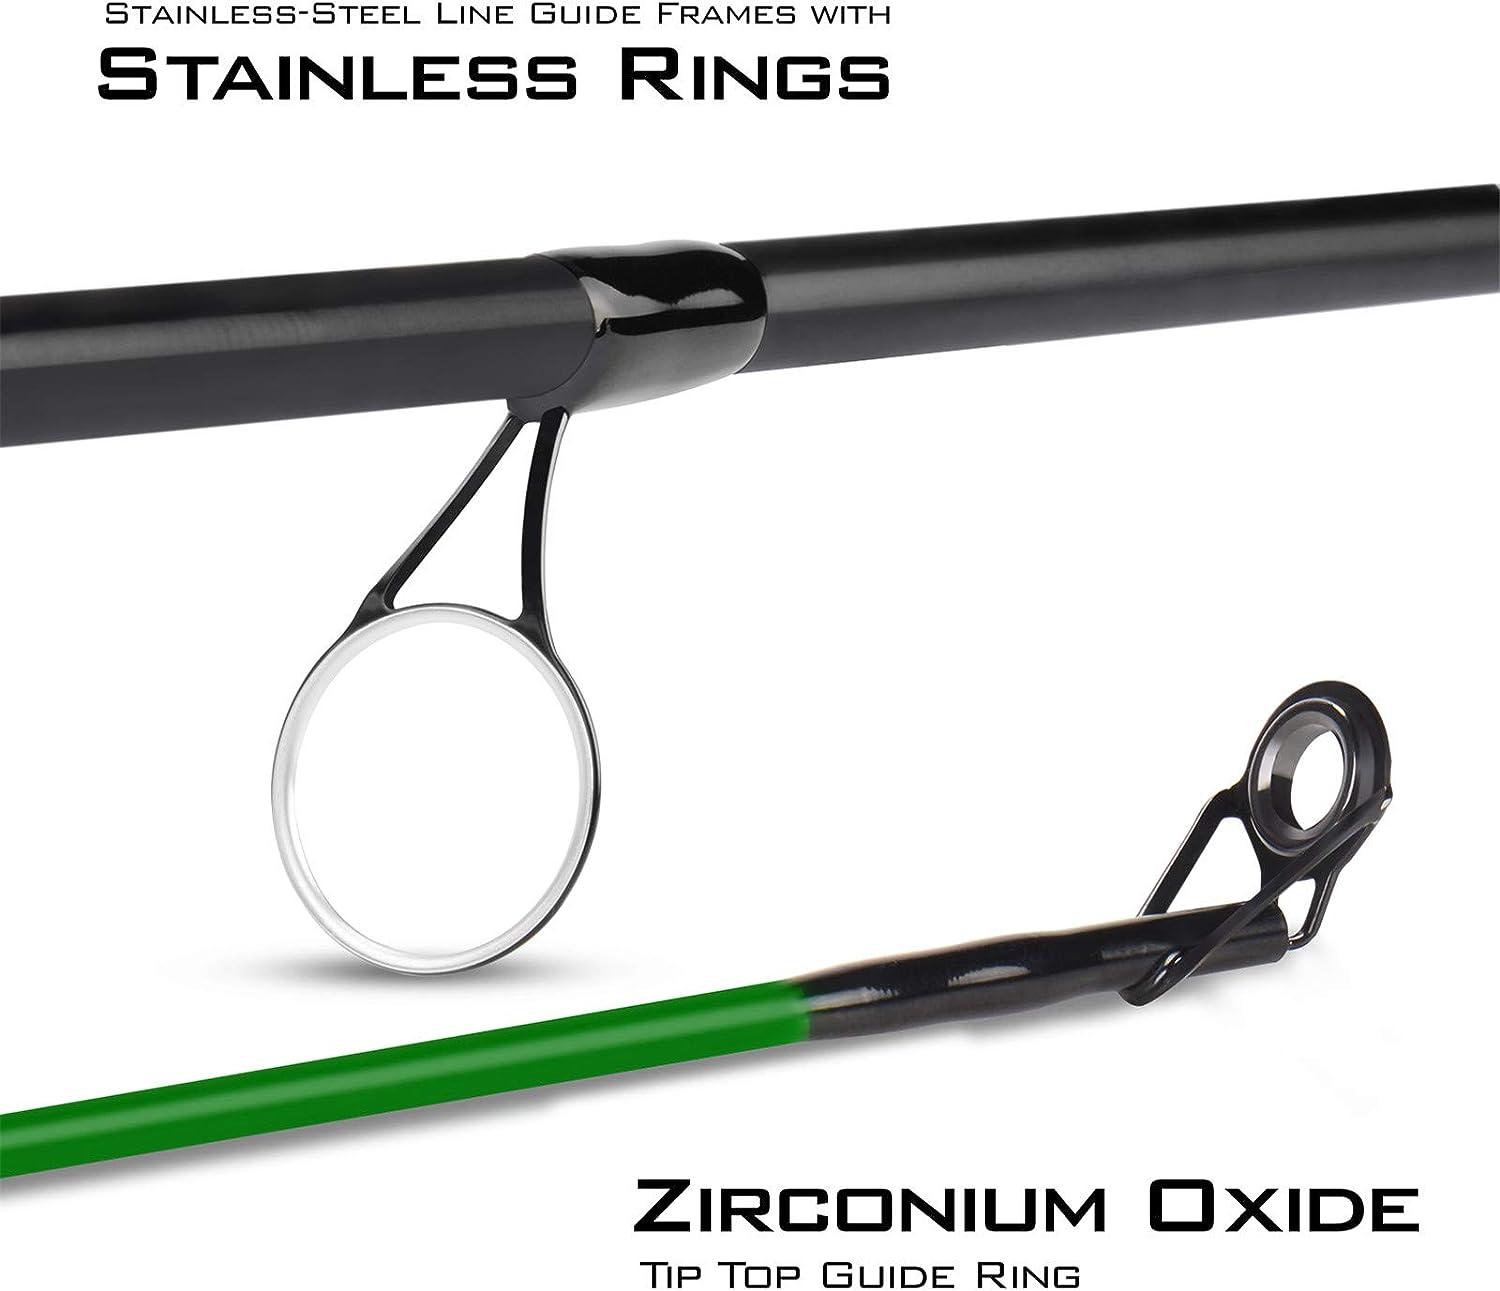 KastKing Brutus Spinning Rods & Casting Fishing Rods, Brute Tuff Composite  Graphite & Glass Blanks, Stainless Steel Line Guides w/Zirconium Oxide  Rings Tip Top, Chartreuse Strike Tip B:spin 5'0-ultra Light - Moderate-2pcs